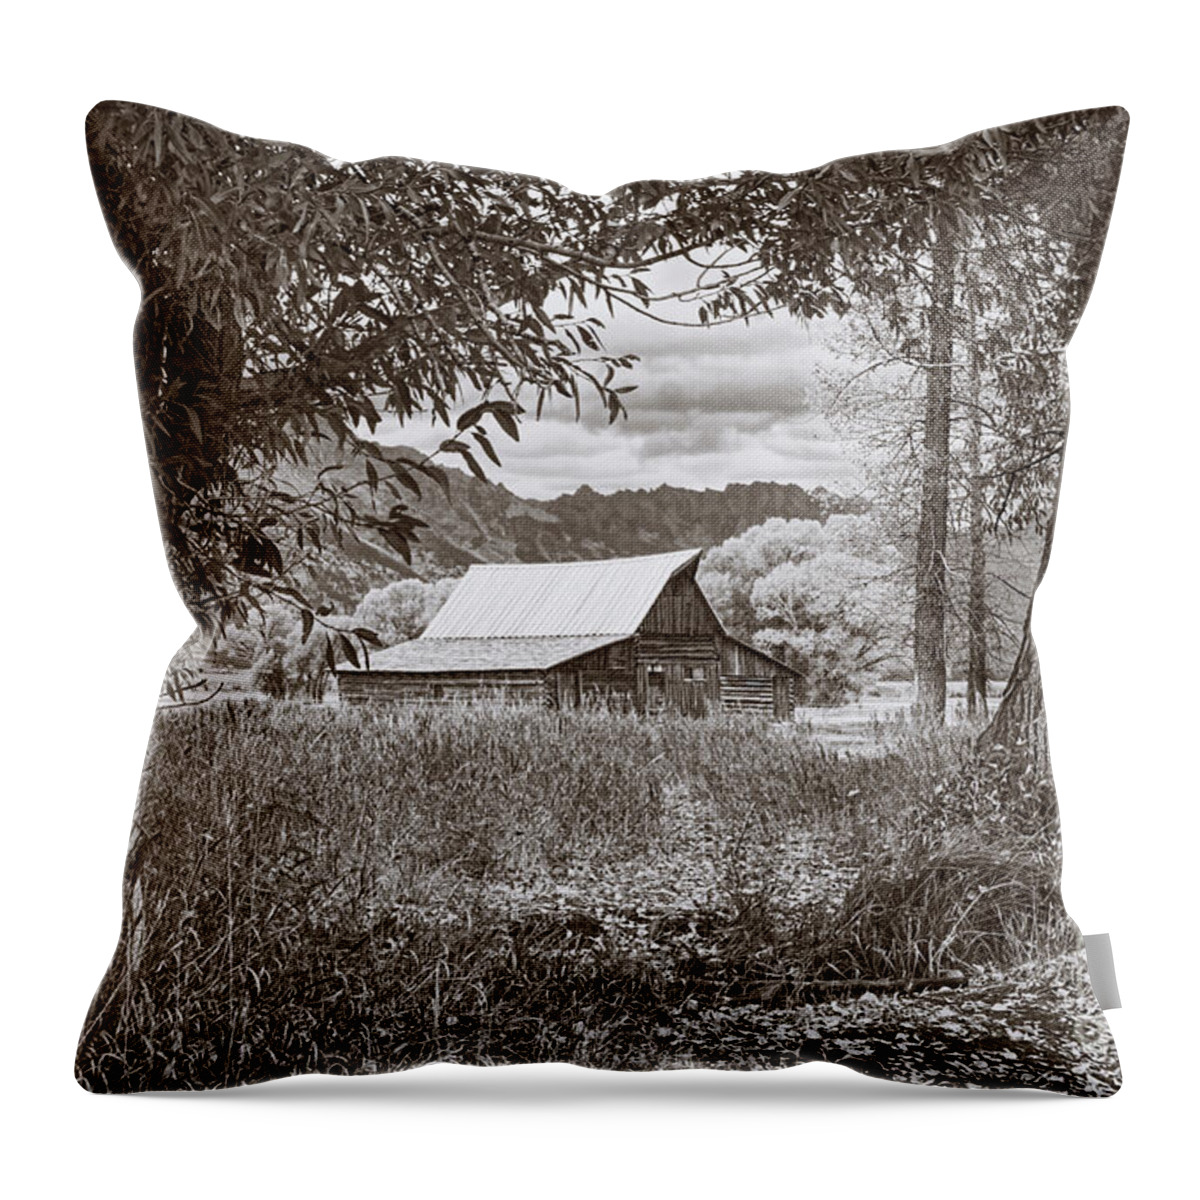 T.a. Moulton Barn Throw Pillow featuring the photograph T.A. Moulton Barn by Priscilla Burgers